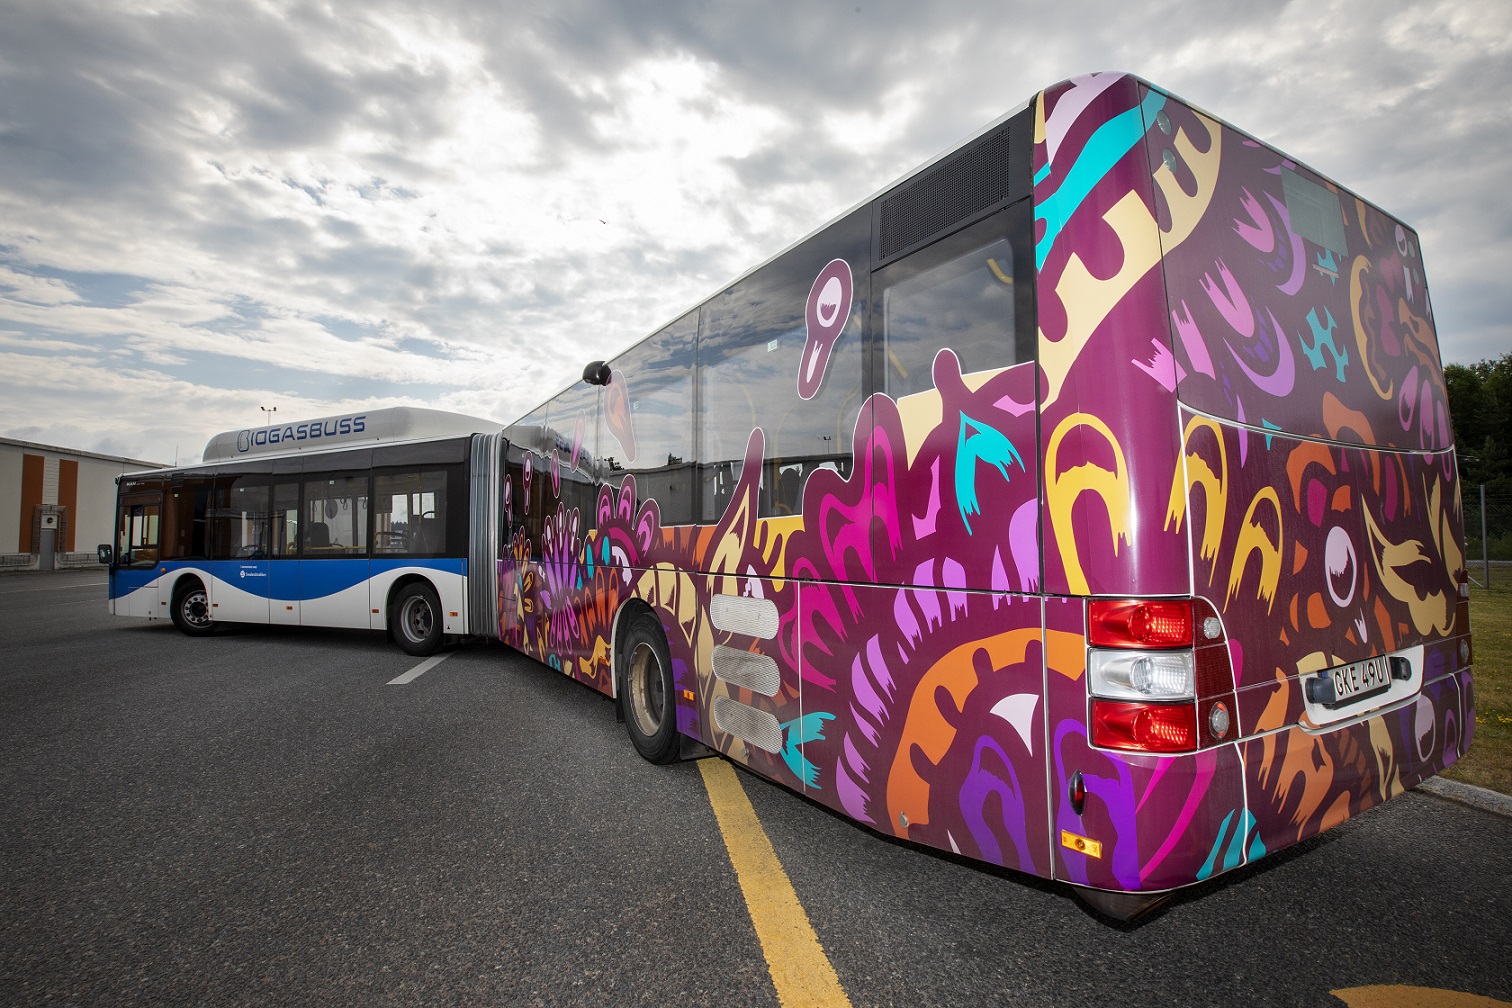 One of the city's city buses, an articulated bus has one half decorated with a print of a floral pattern. The pattern comes in different forms and is mainly in the color purple but also outlines in the colors yellow, orange, blue and pink.